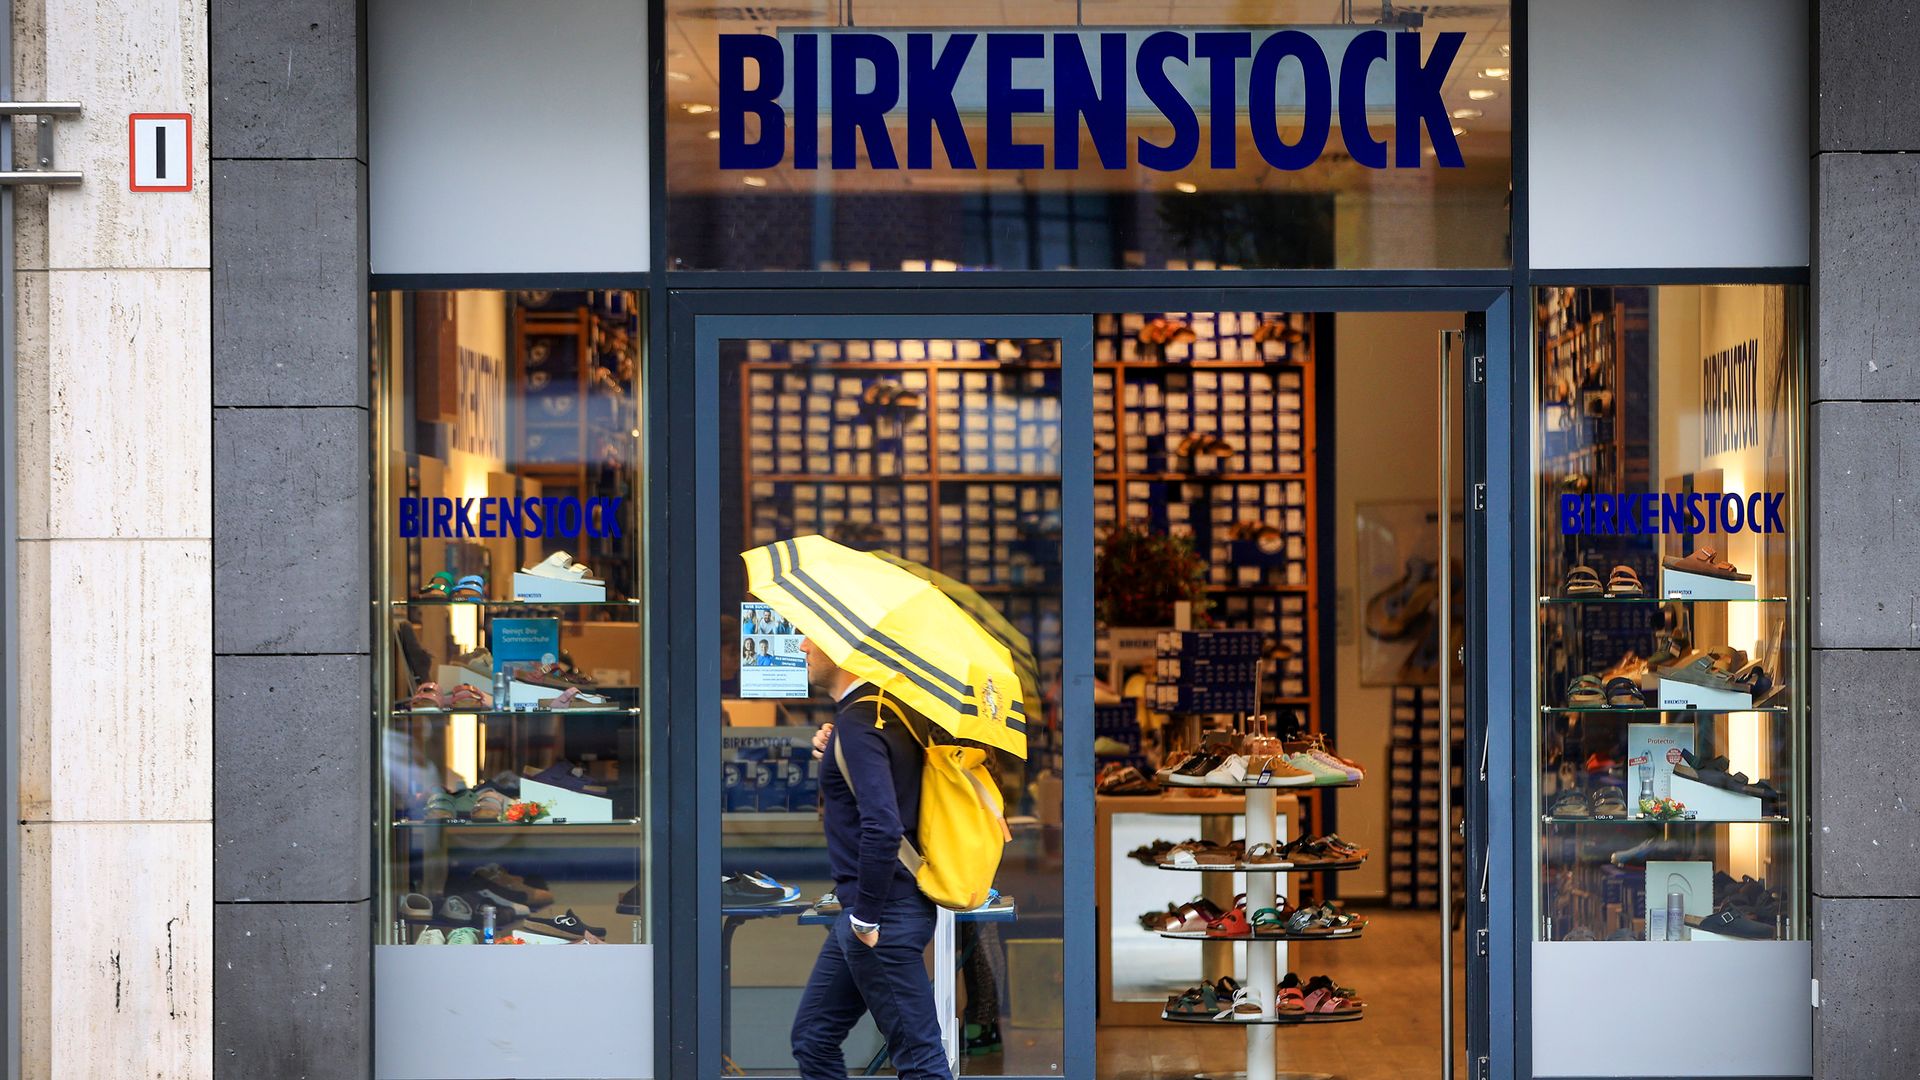 A person with an umbrella walks past the front of a Birkenstock store.